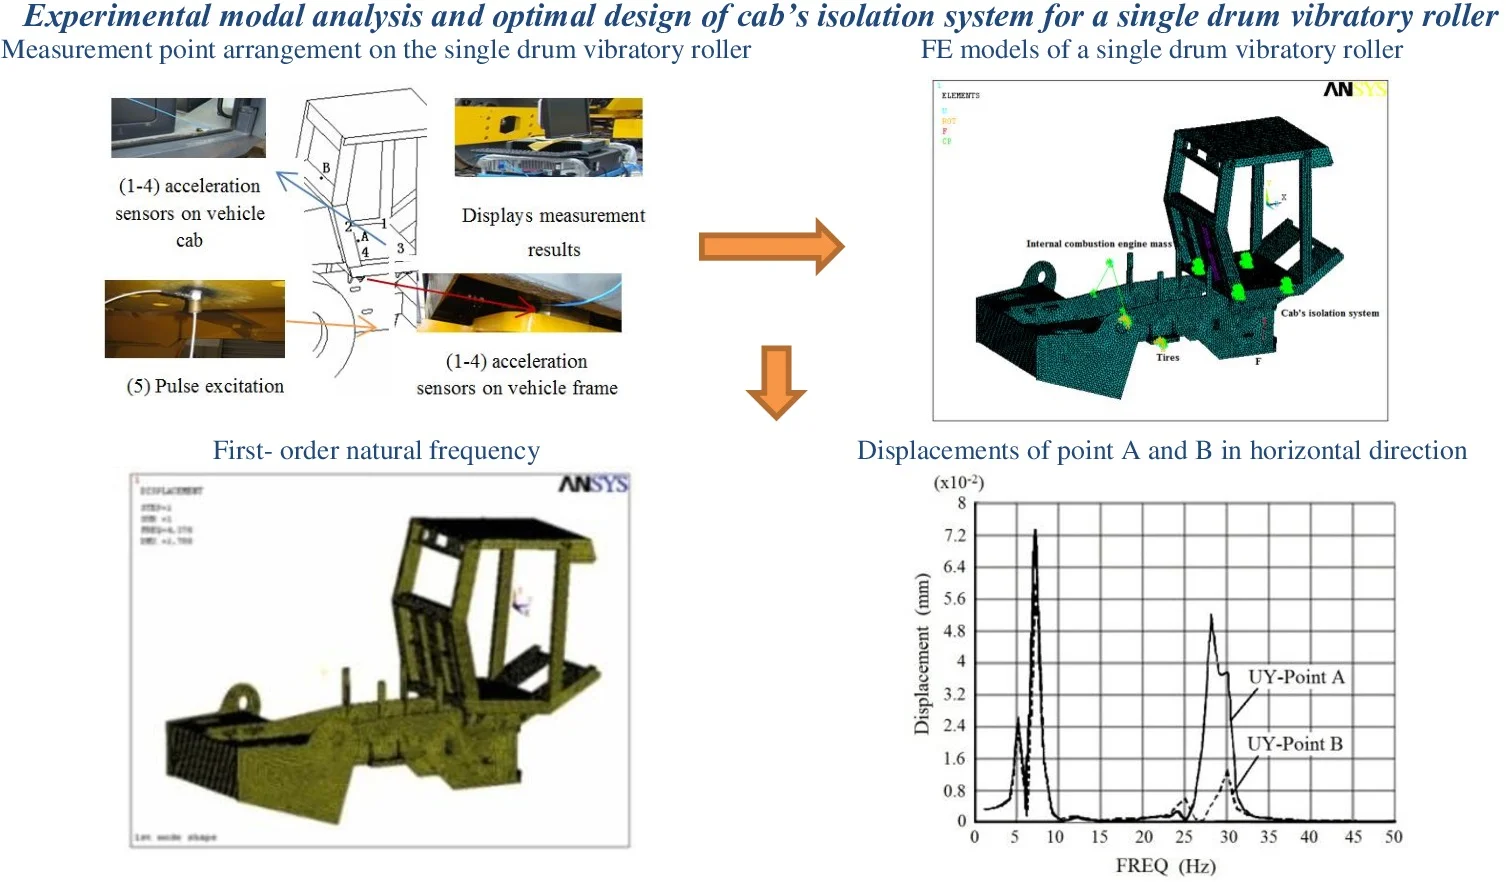 Experimental modal analysis and optimal design of cab’s isolation system for a single drum vibratory roller